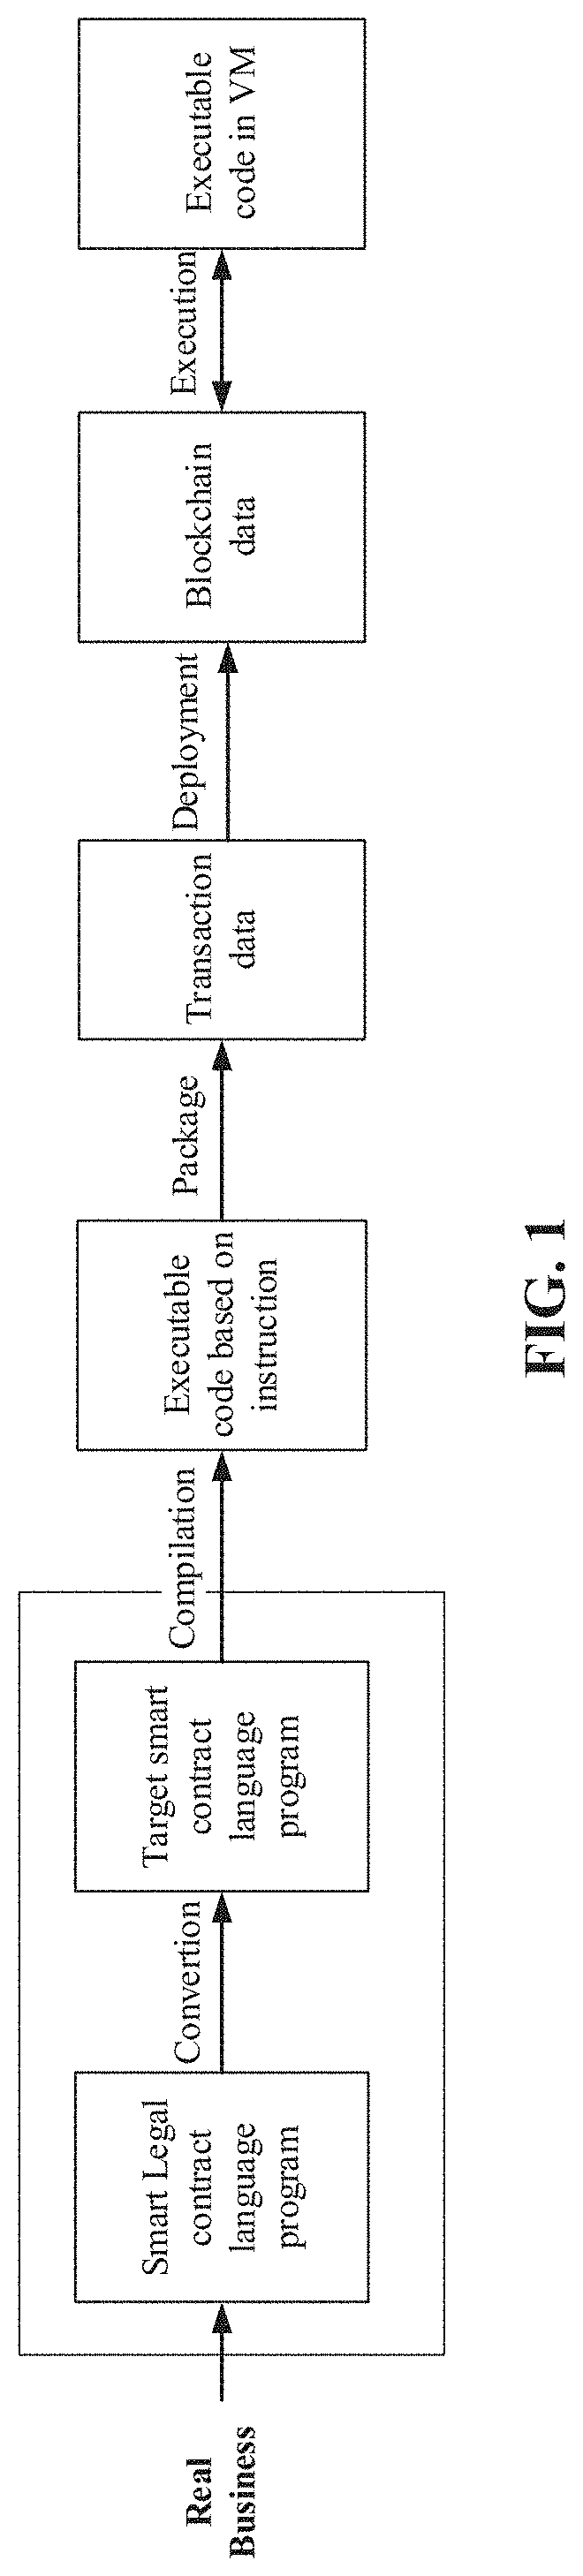 Method and System for Executable Smart Legal Contract Construction and Execution over Legal Contracts